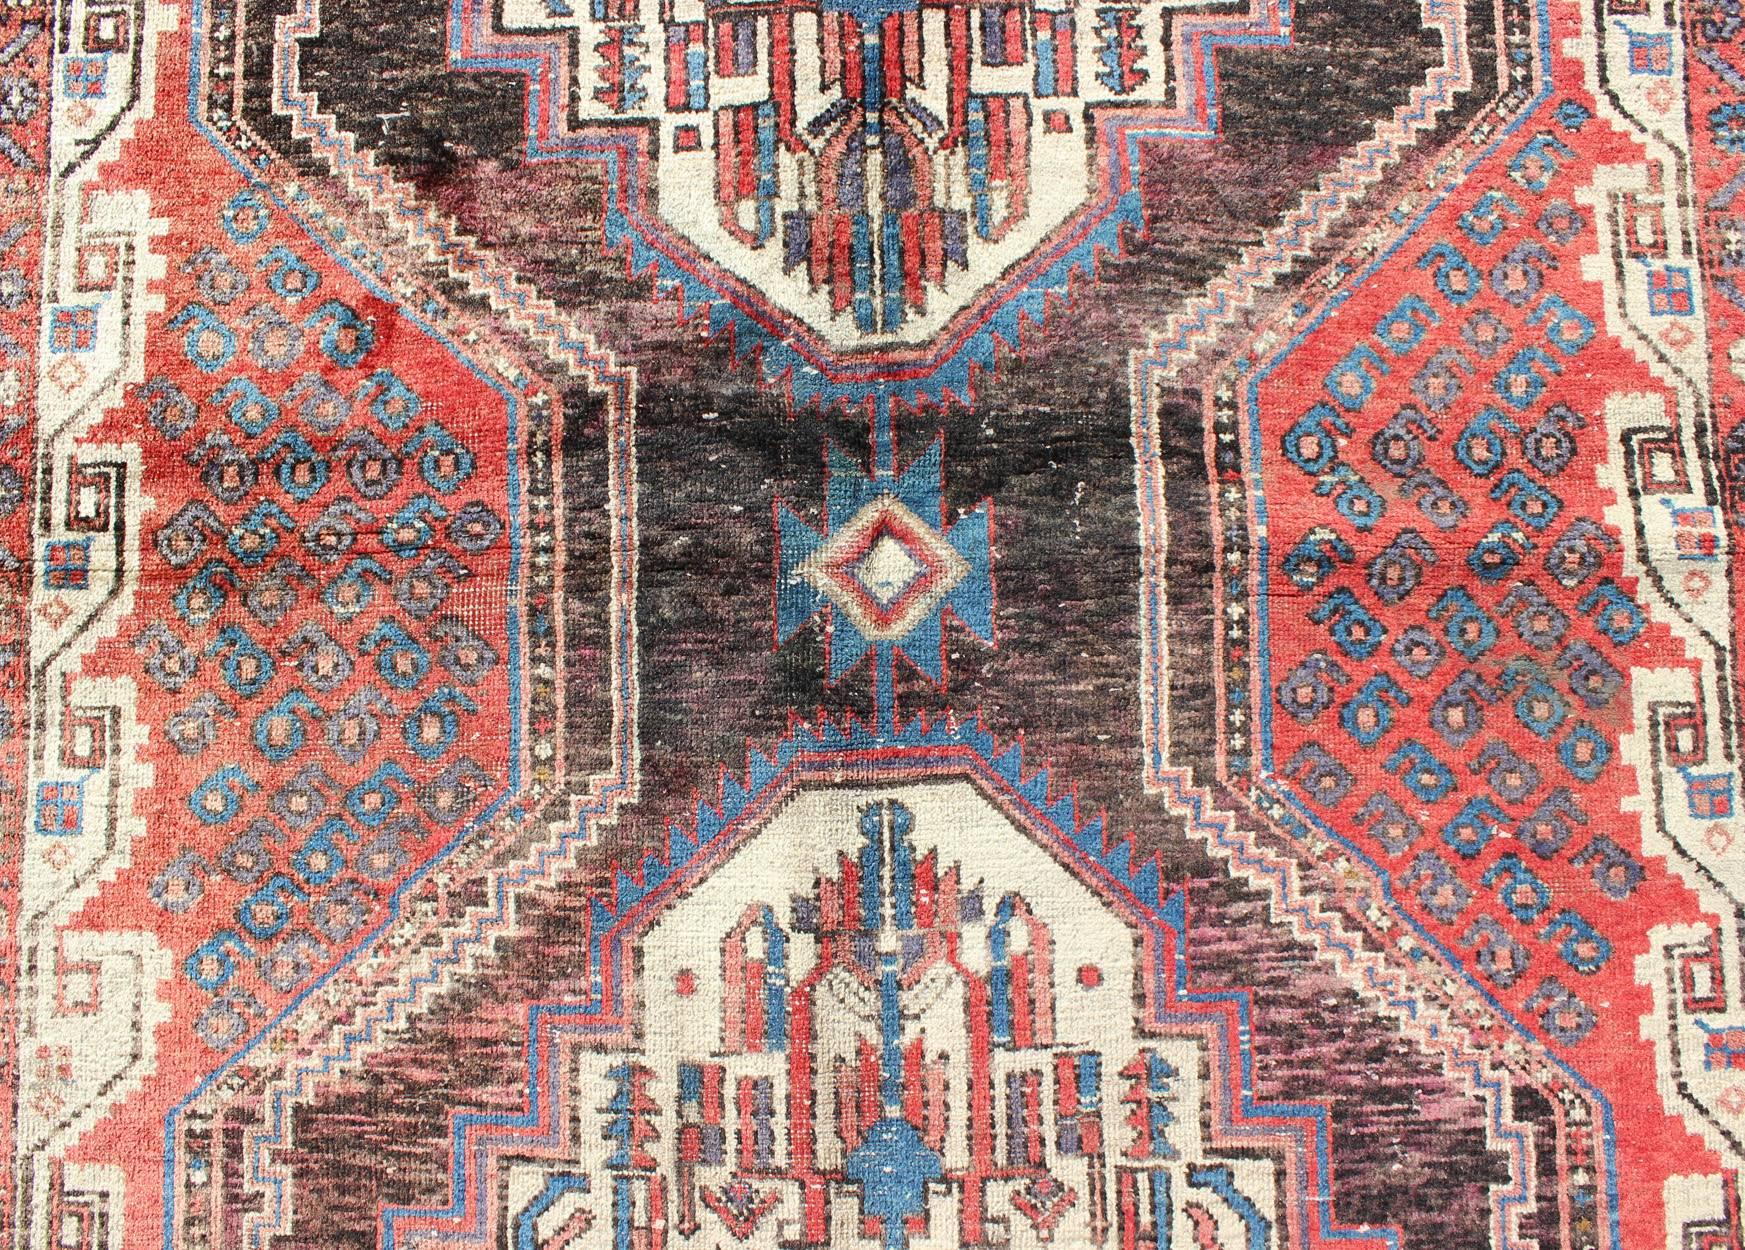 Mid-20th Century Dual Medallion Vintage Persian Seejan Rug in Red, Charcoal, Blue, and Brown